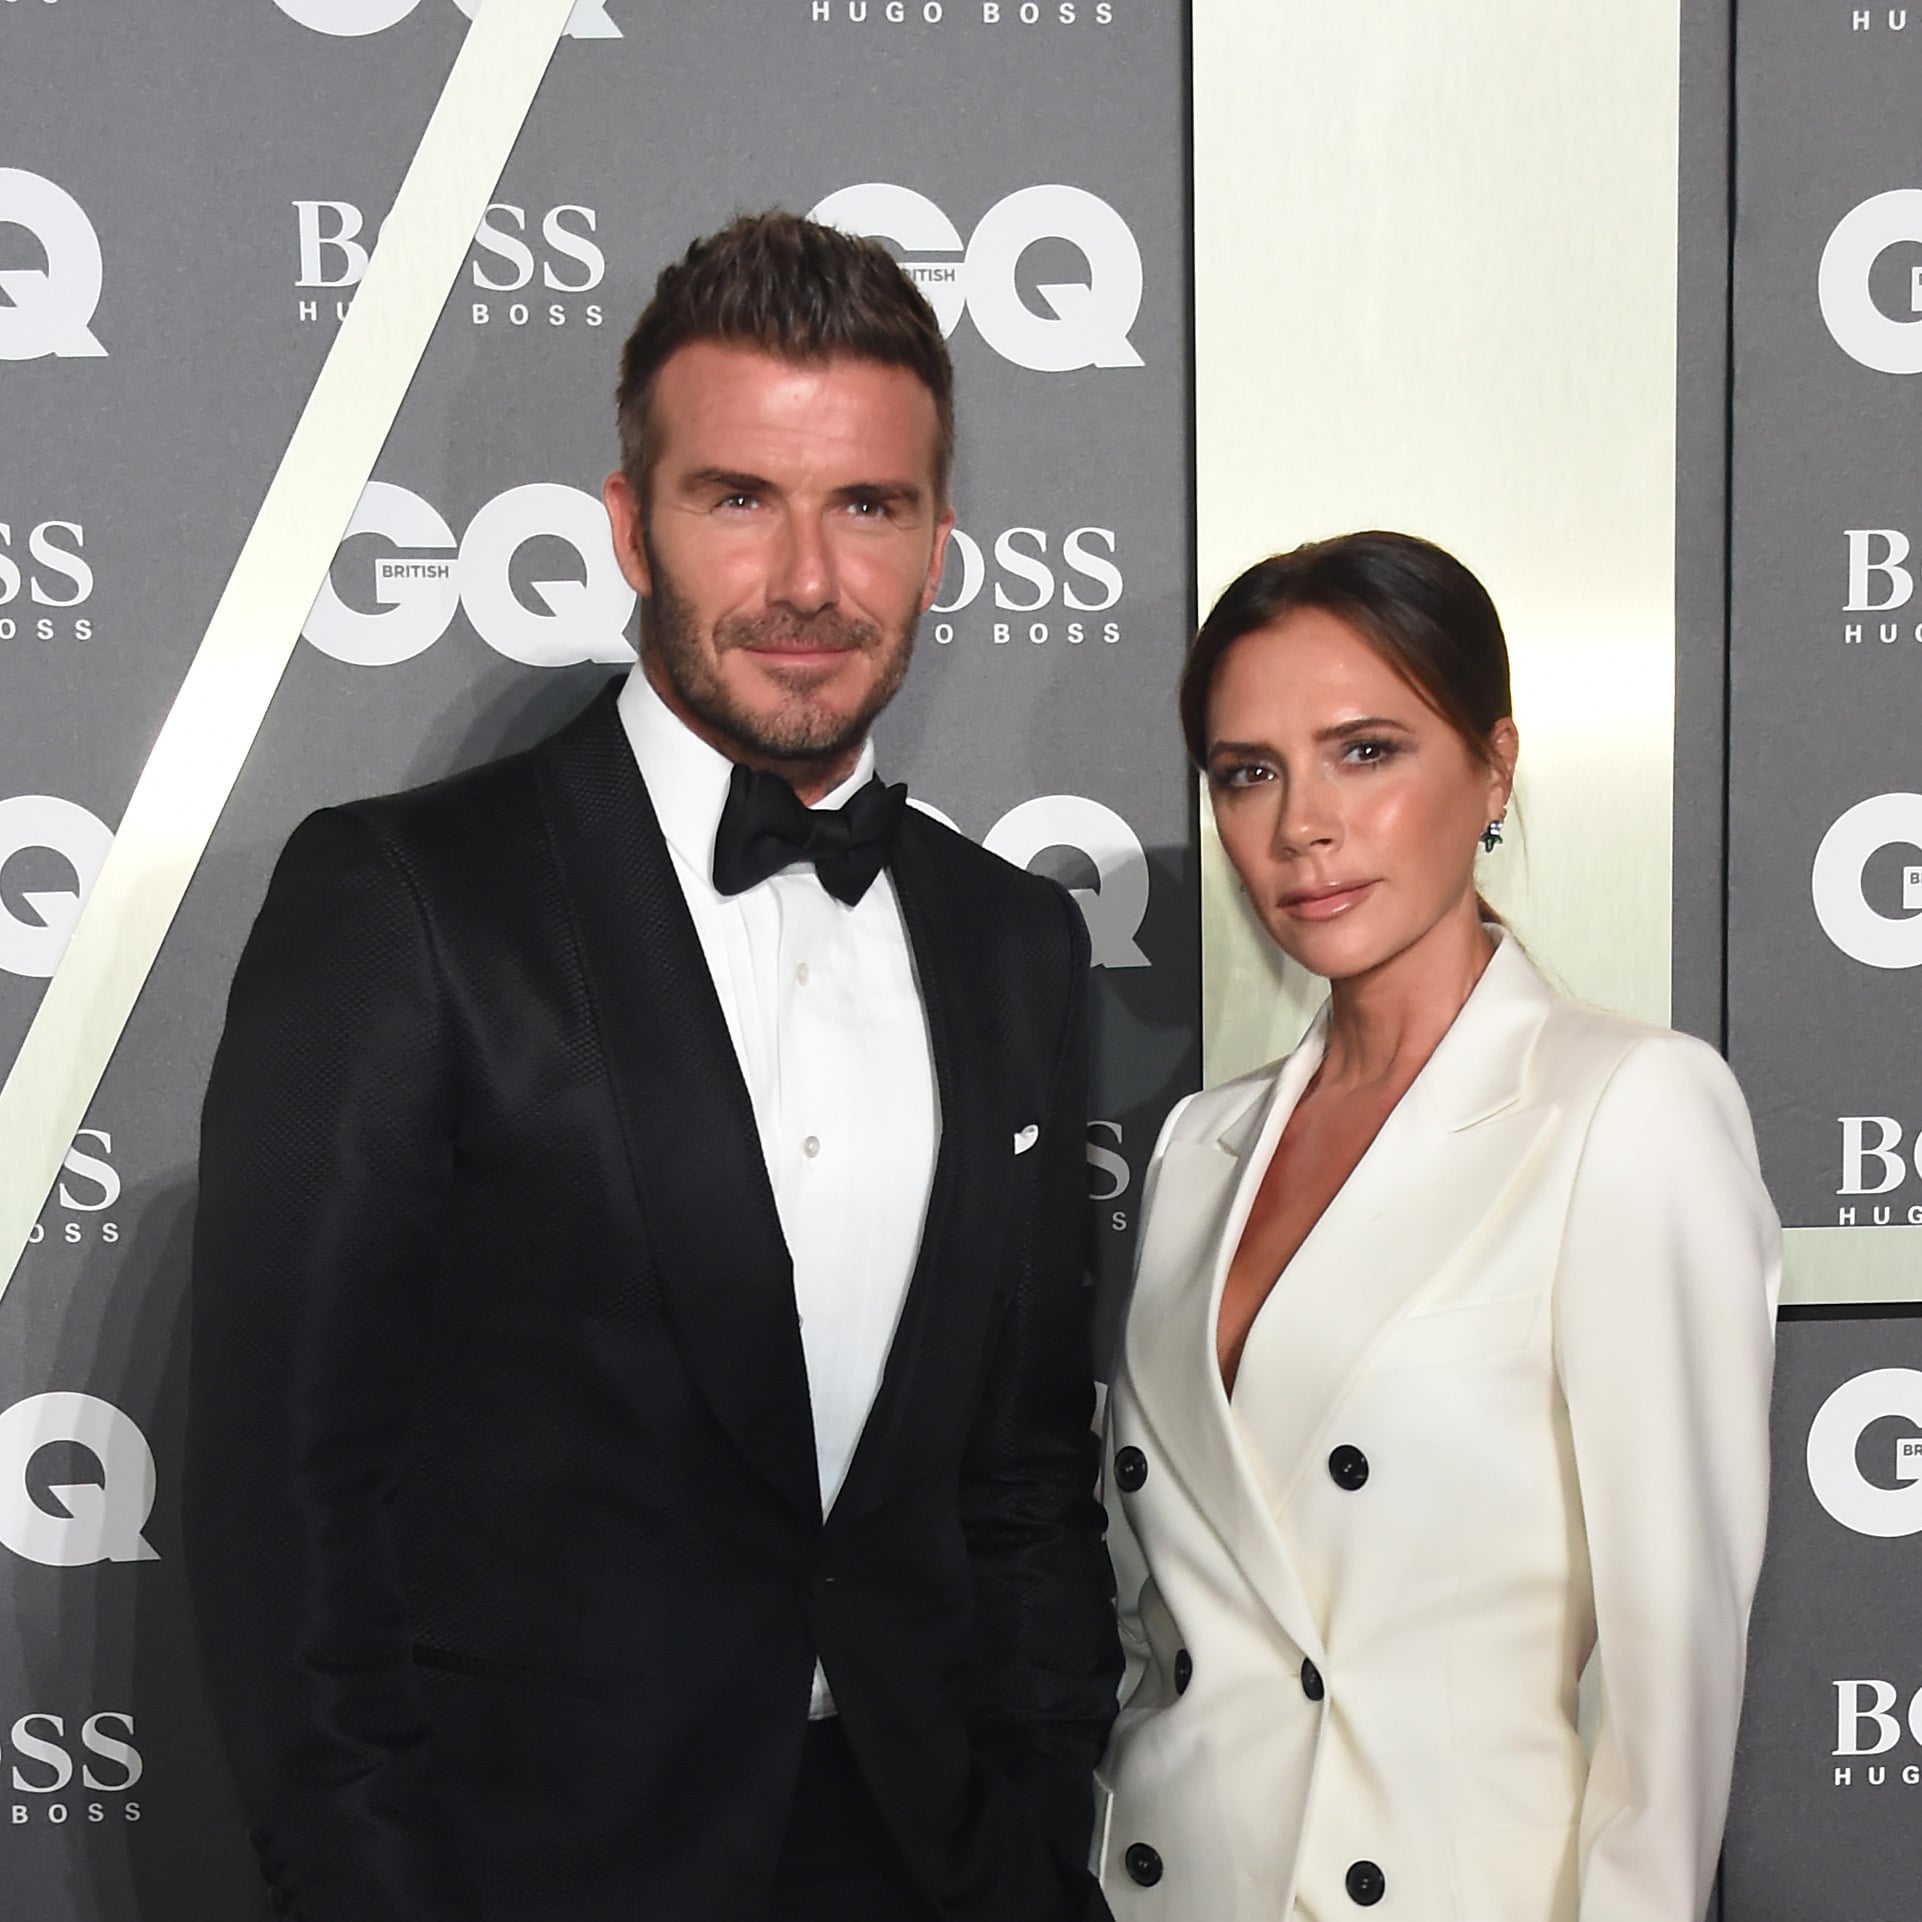 Victoria Beckham Jokes About That Matching Leather Look with David: 